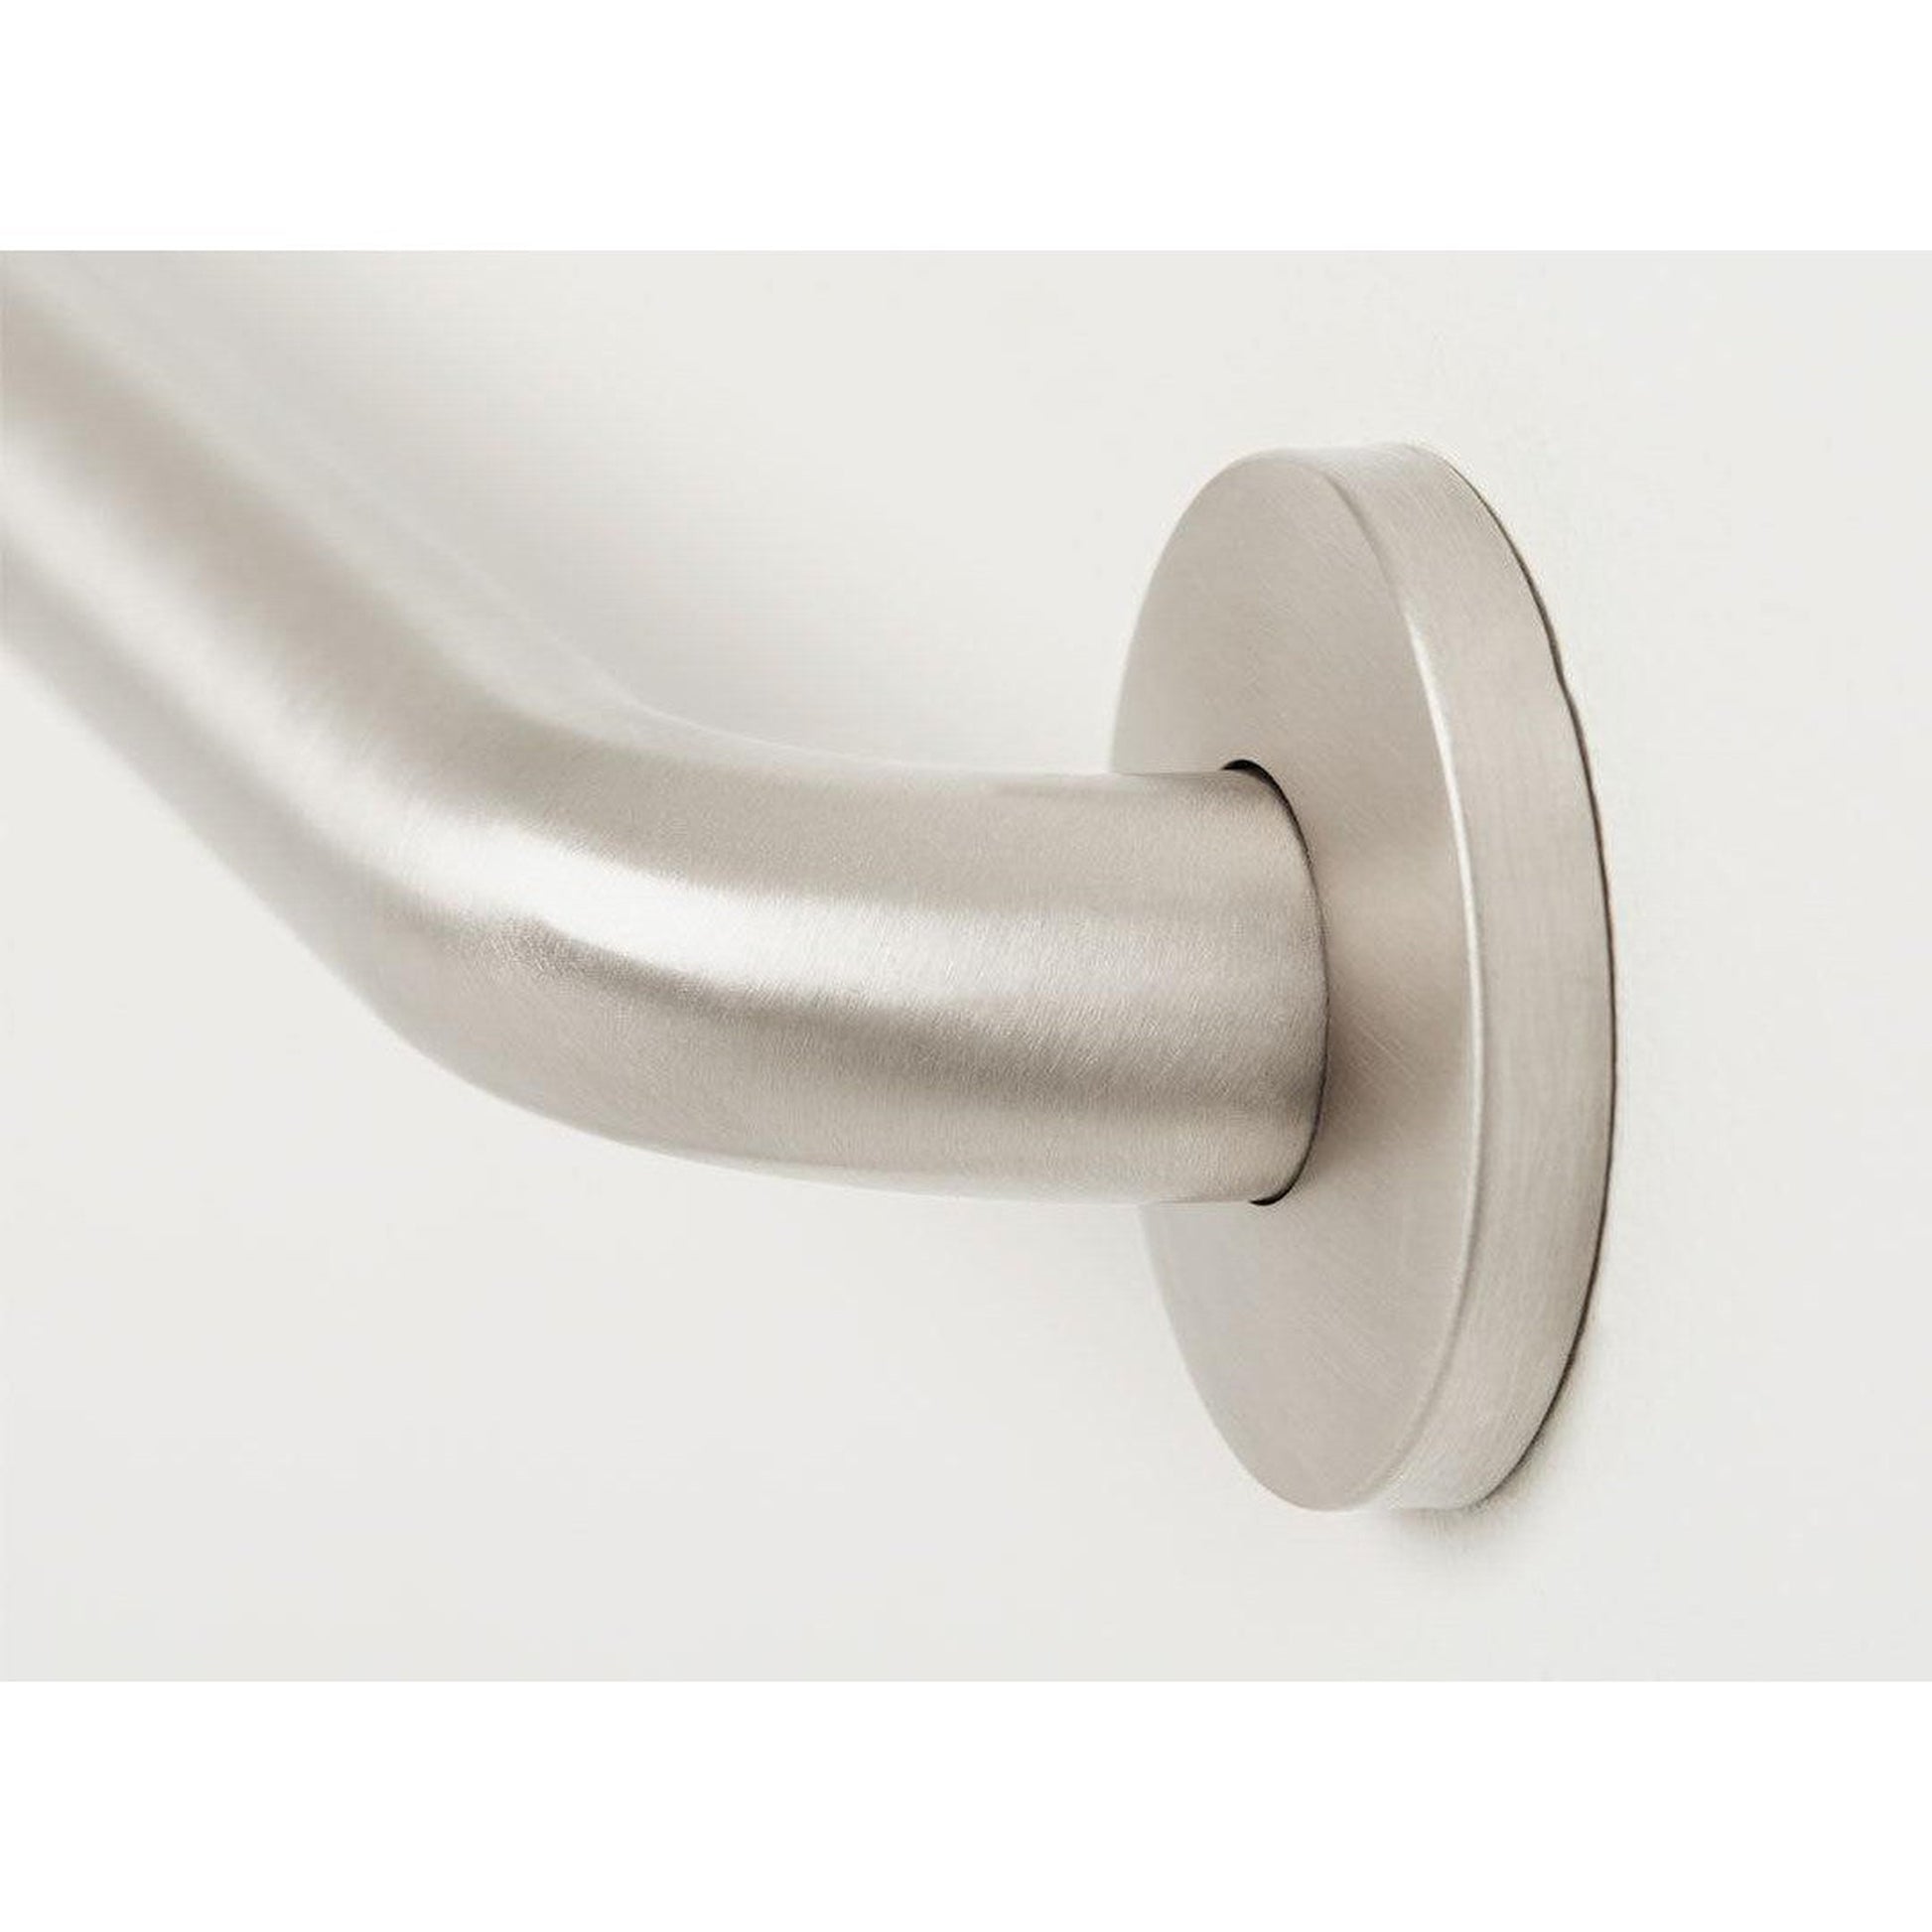 Seachrome Signature Series 20" x 40" Satin Stainless Steel 1.5" Bar Diameter Concealed Flange Curved Tub and Shower Grab Bar